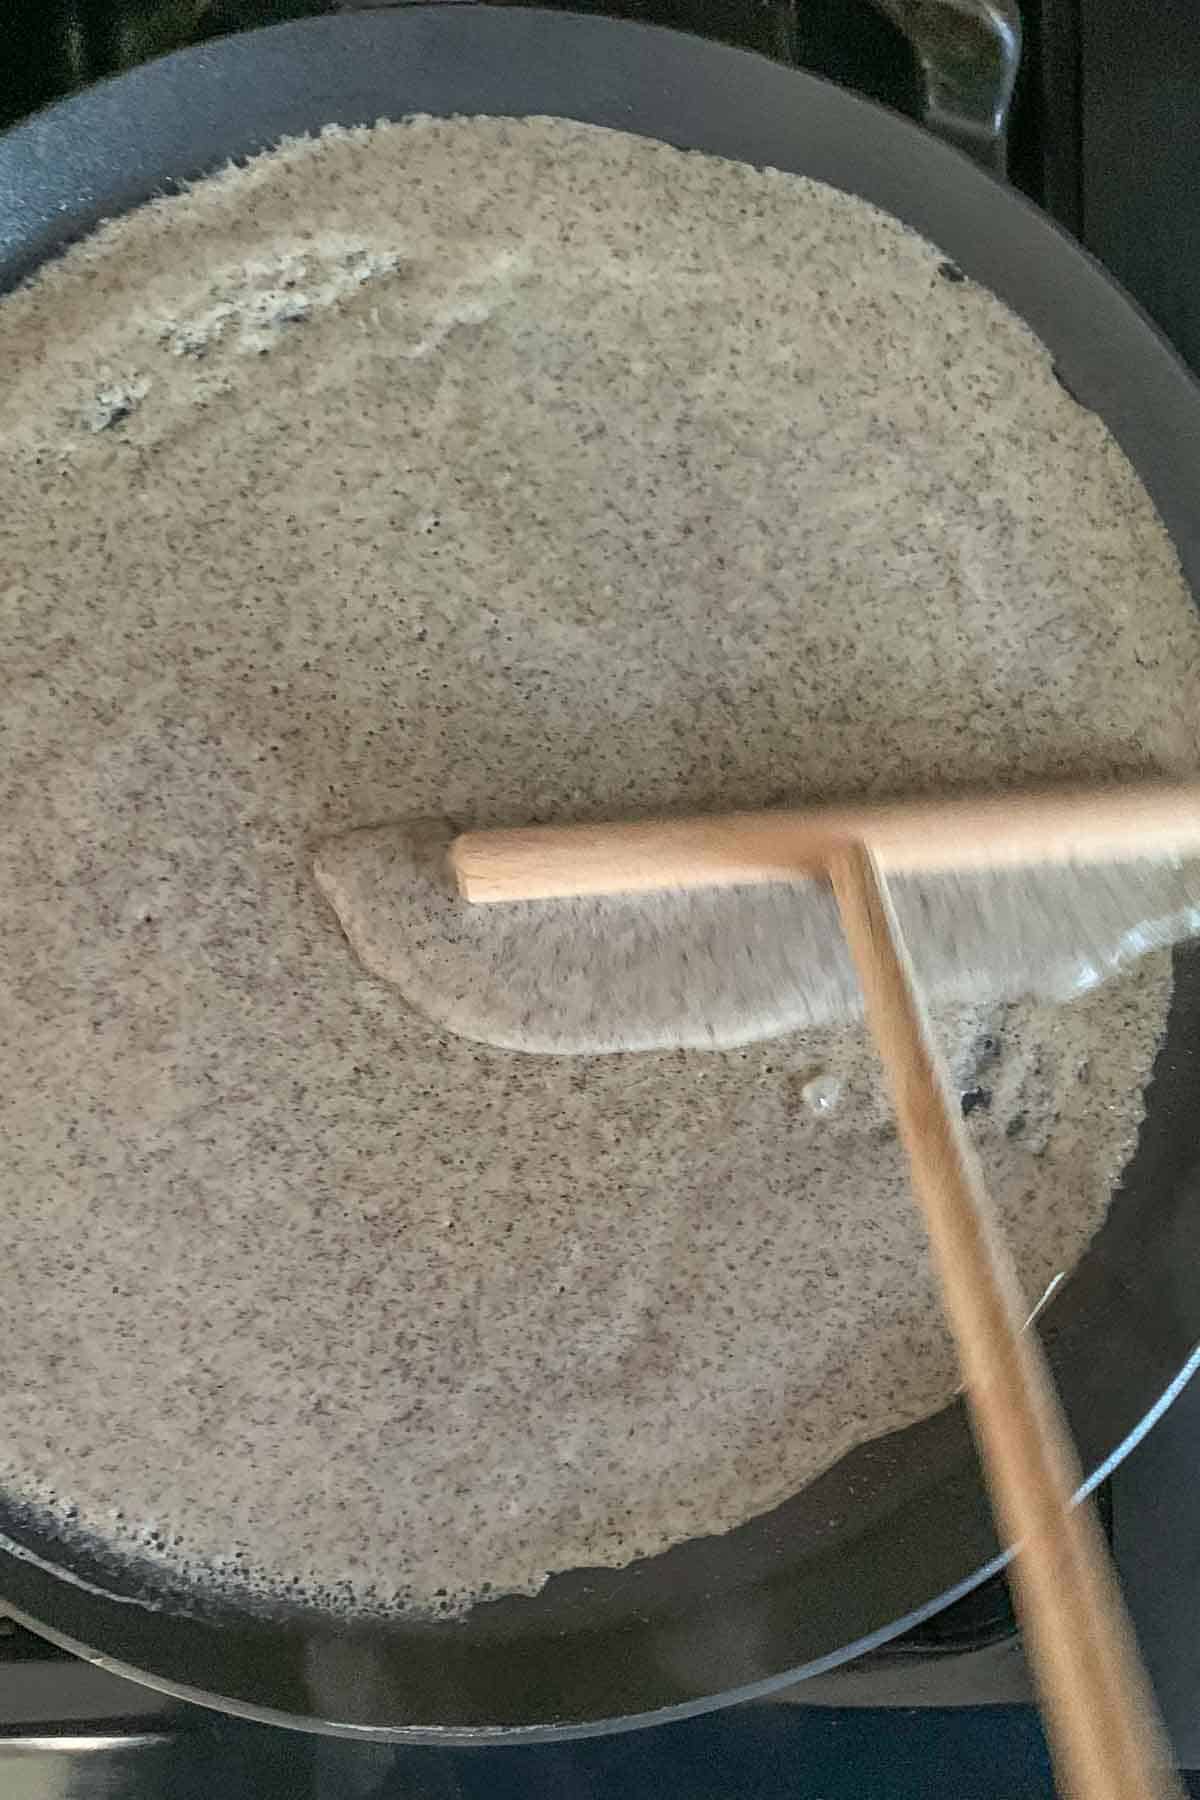 Spreading crepe batter onto a pan.